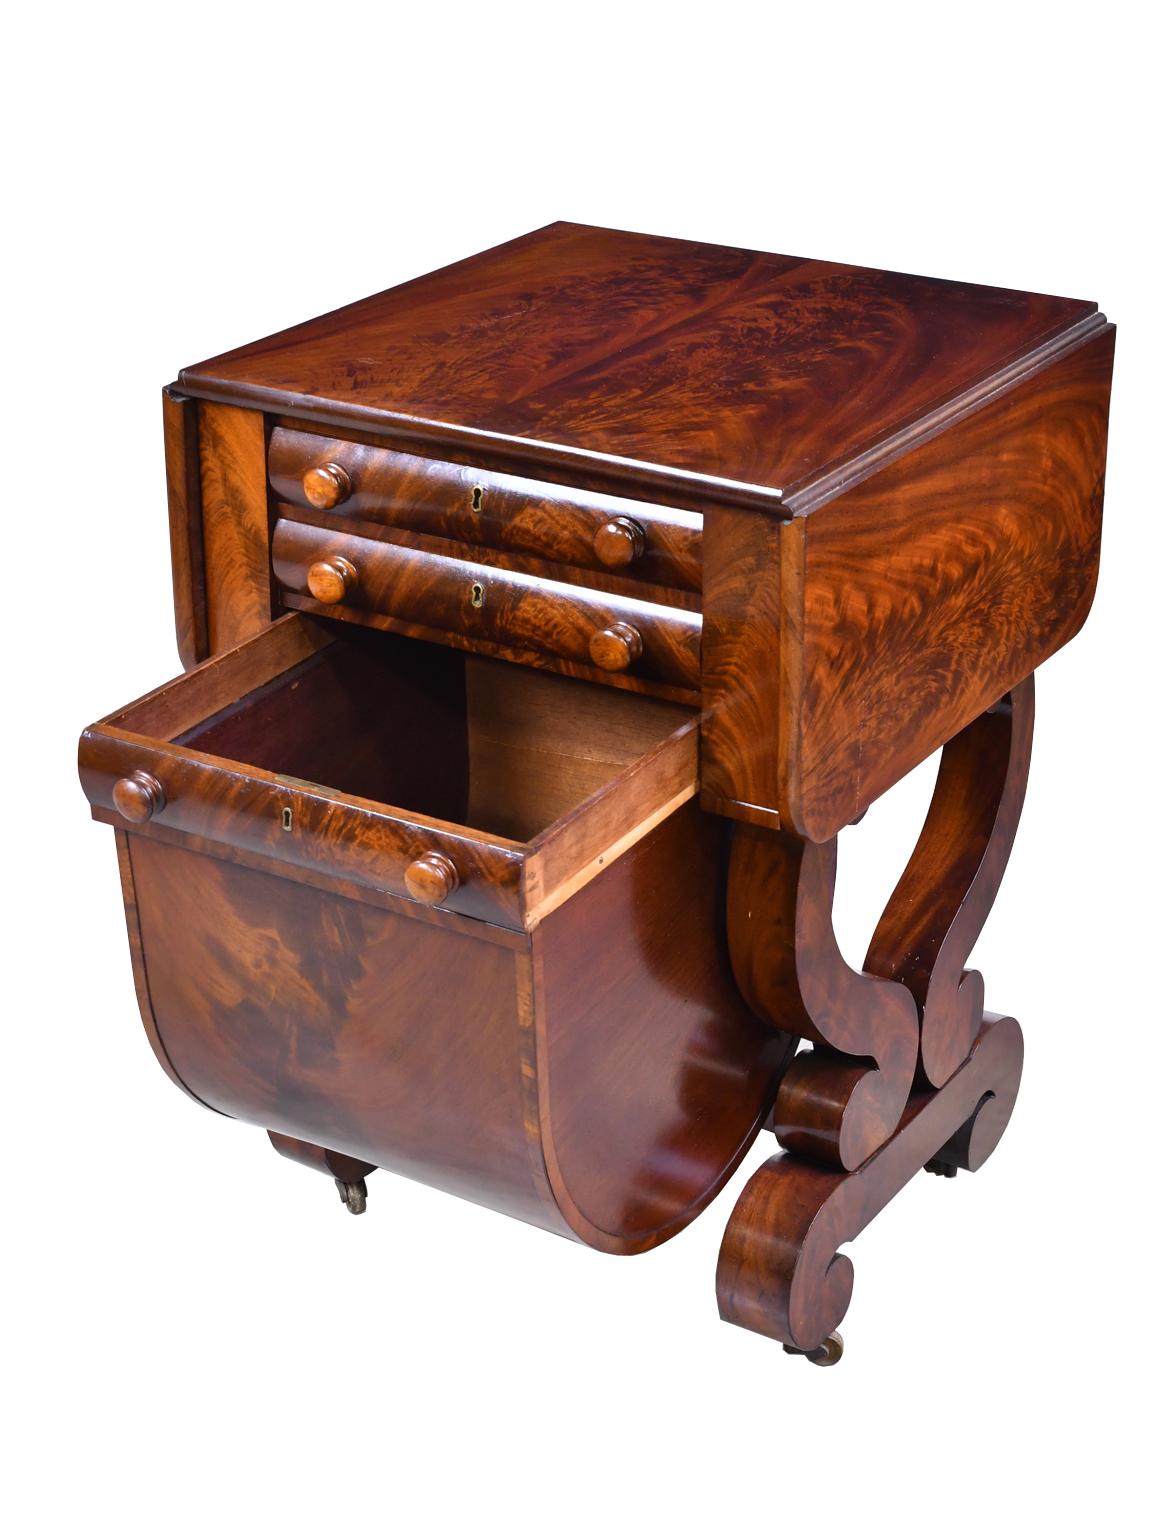 A very beautiful American Empire work table in the Grecian style in a very fine grade of solid West Indies mahogany with expert book-matching of the top planks and the crotch veneer. The top has two leaves that fold-down when not in use. The